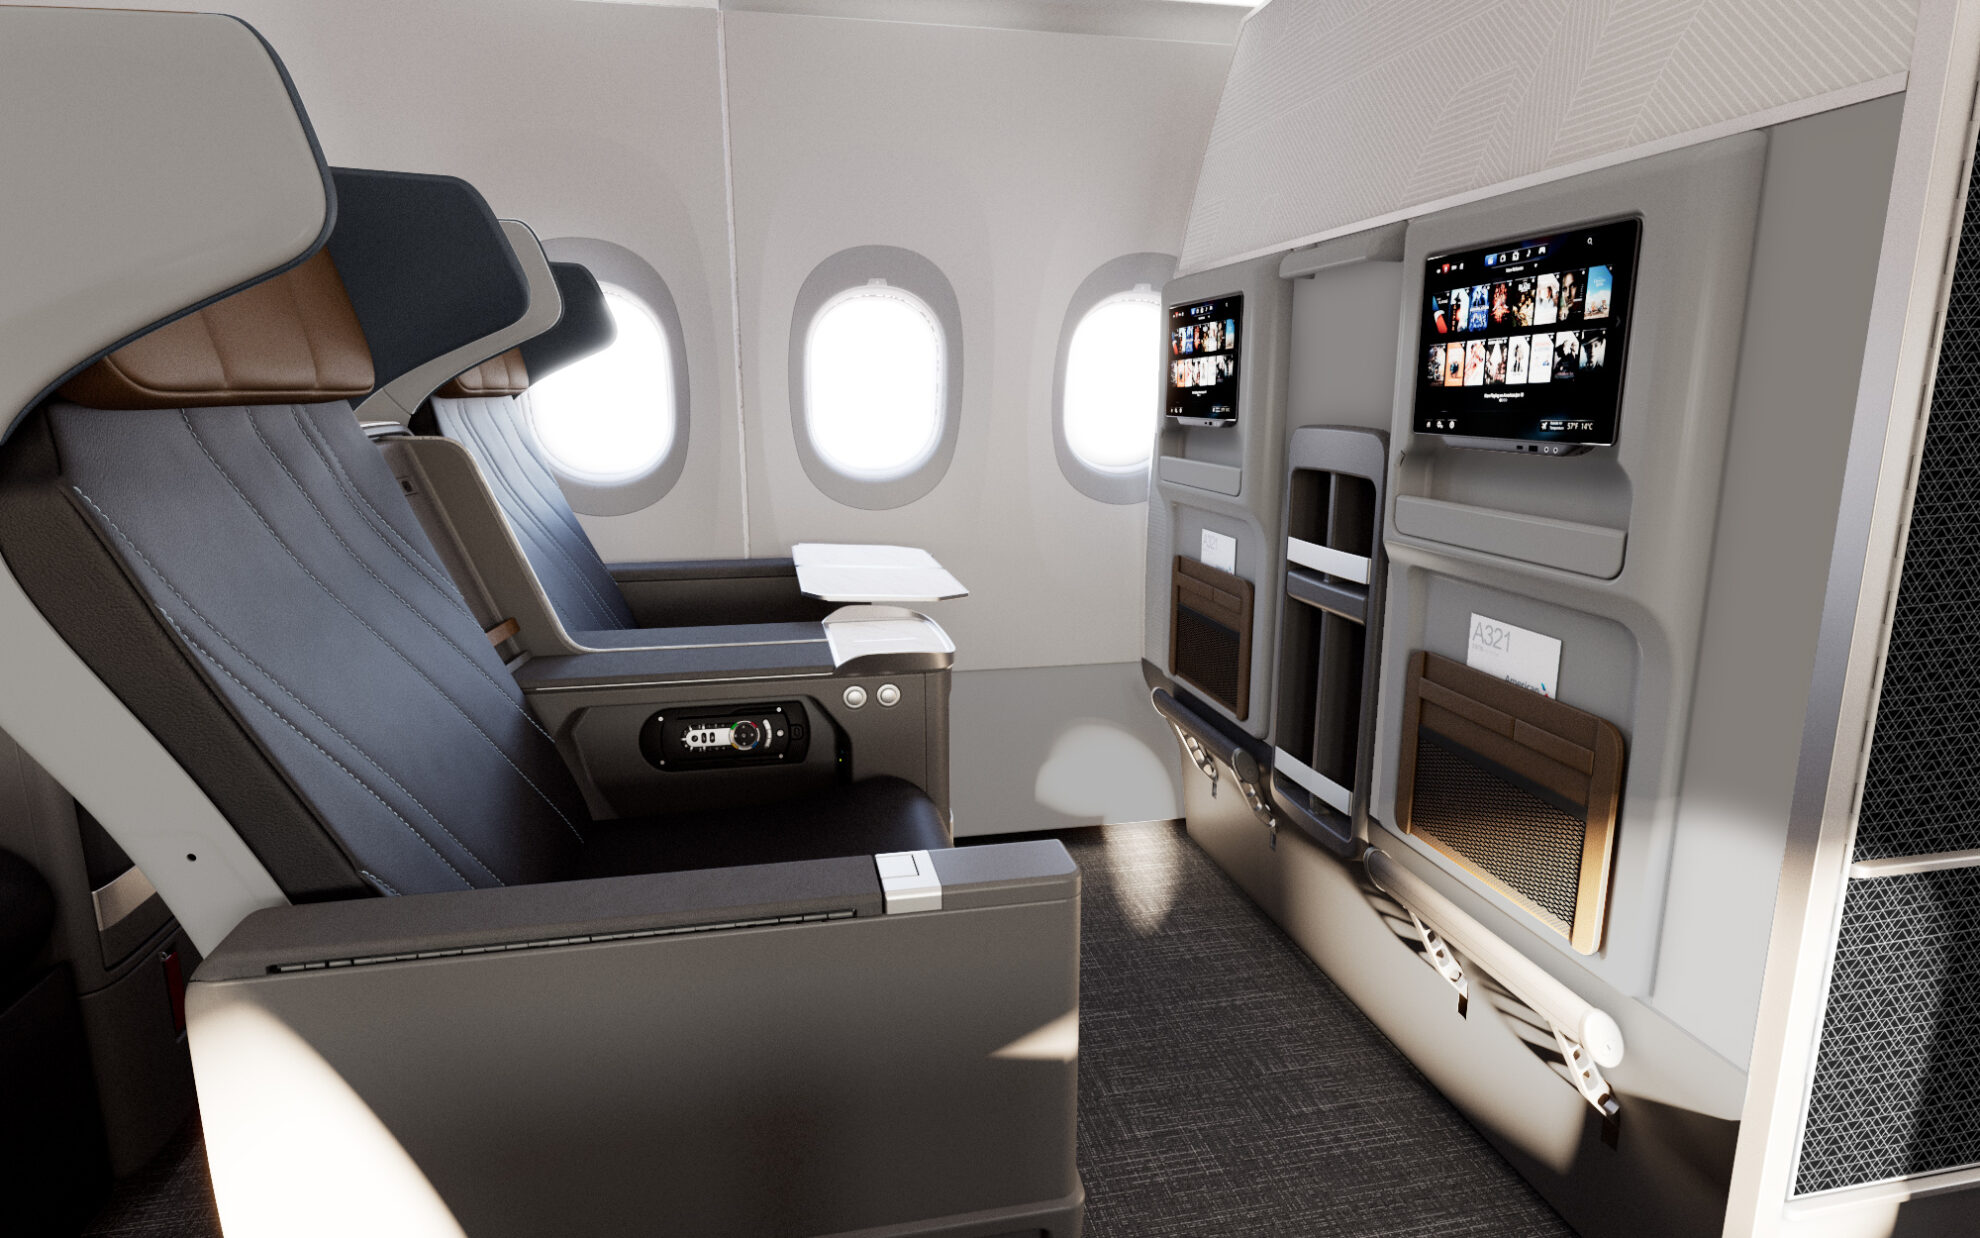 American Airlines Flagship Suite A321